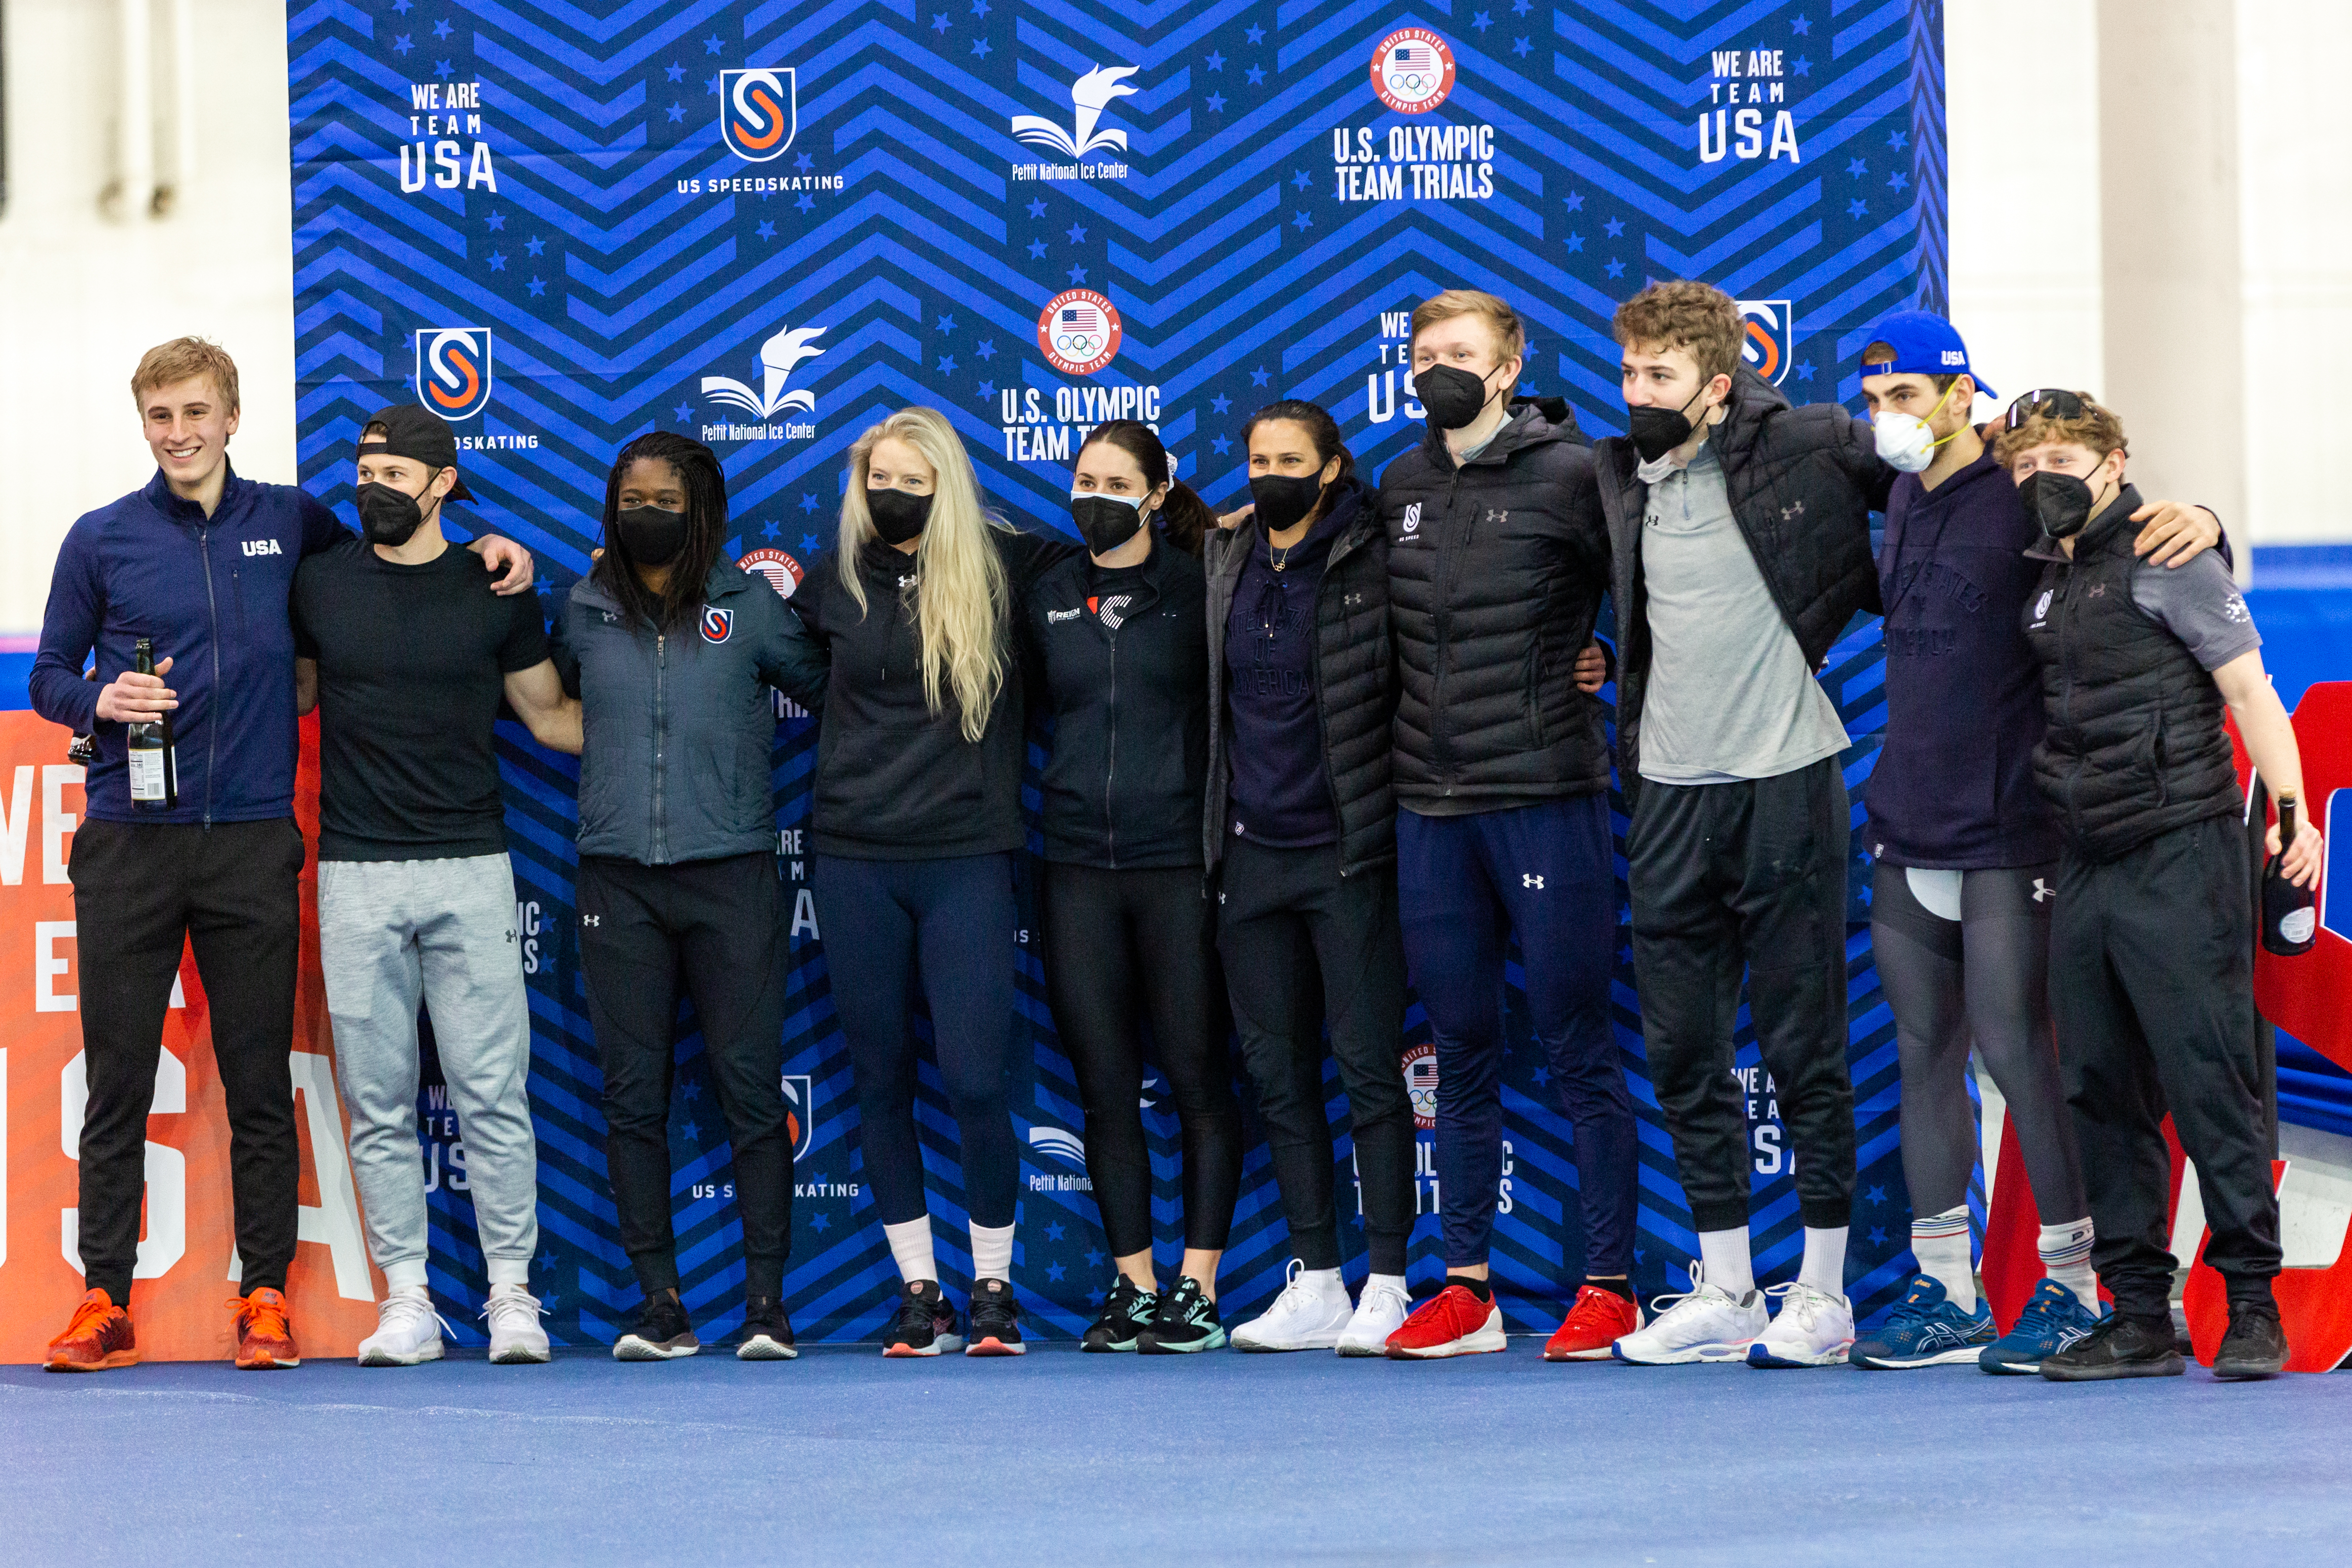 A group shot of several Olympic athletes standing next to each other posing for a picture.